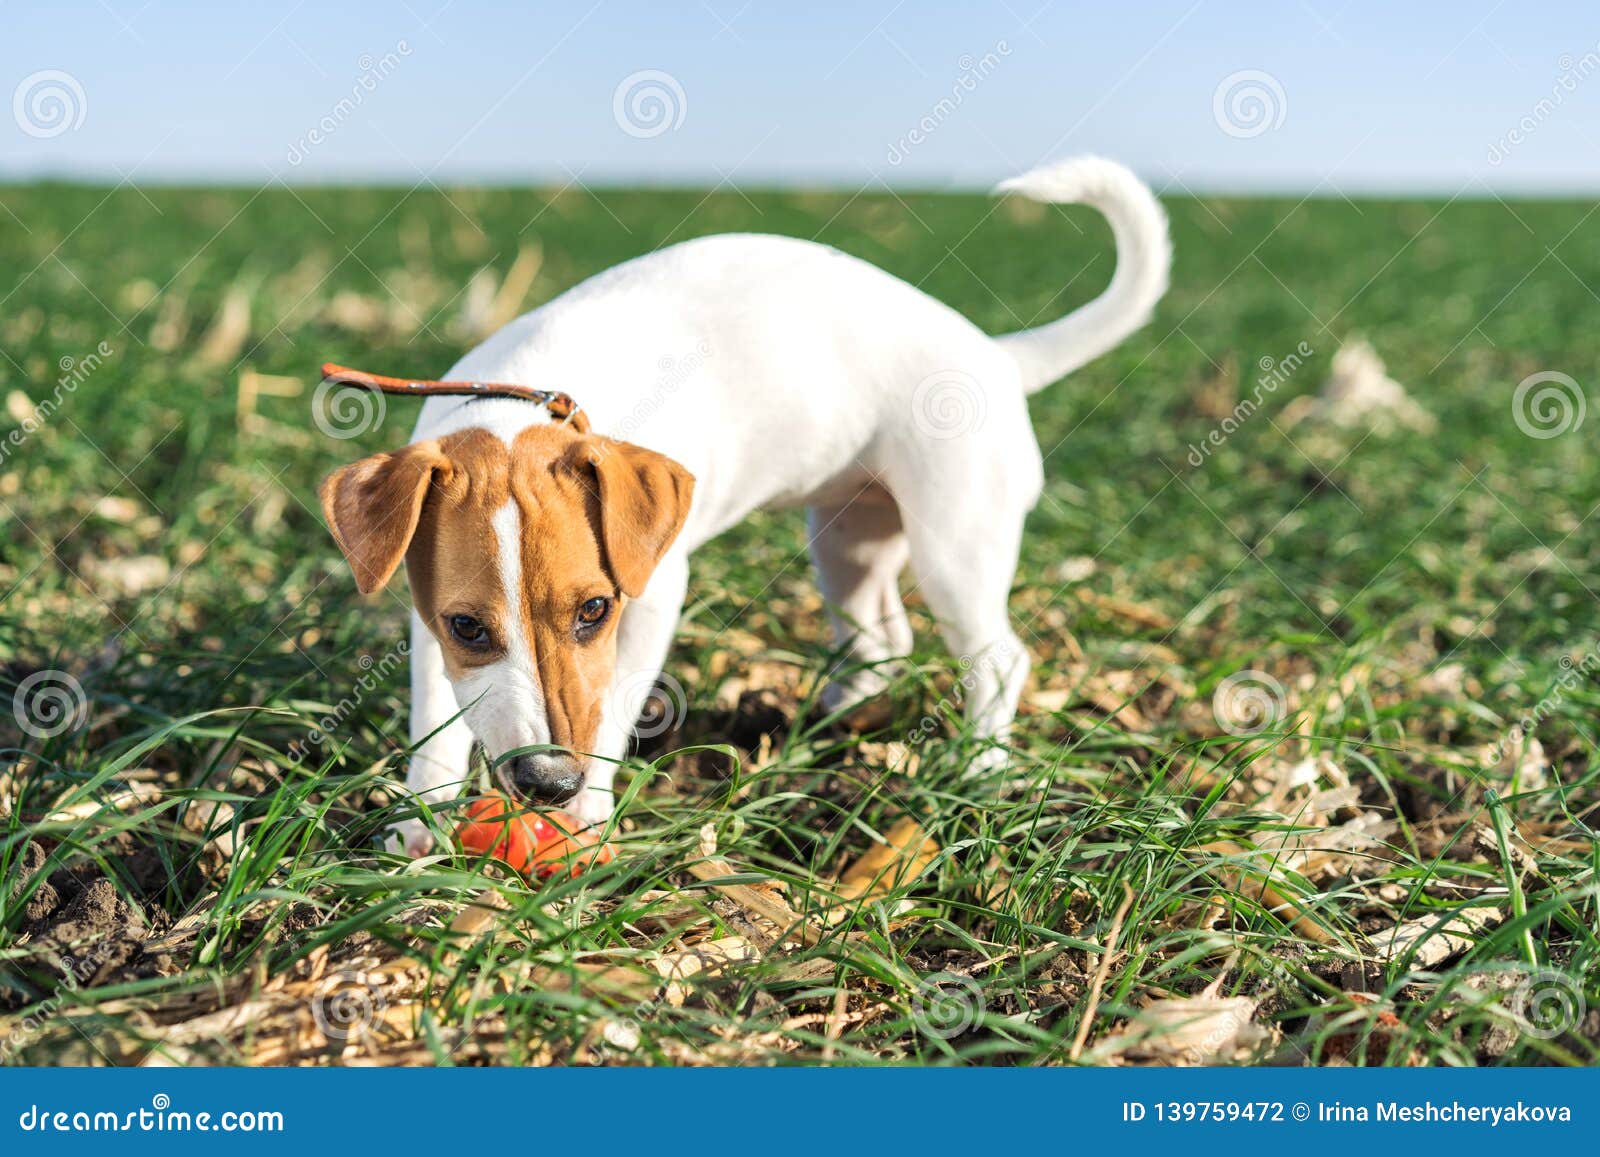 cute dog terrier jack russell play happy over the meadow with a ball